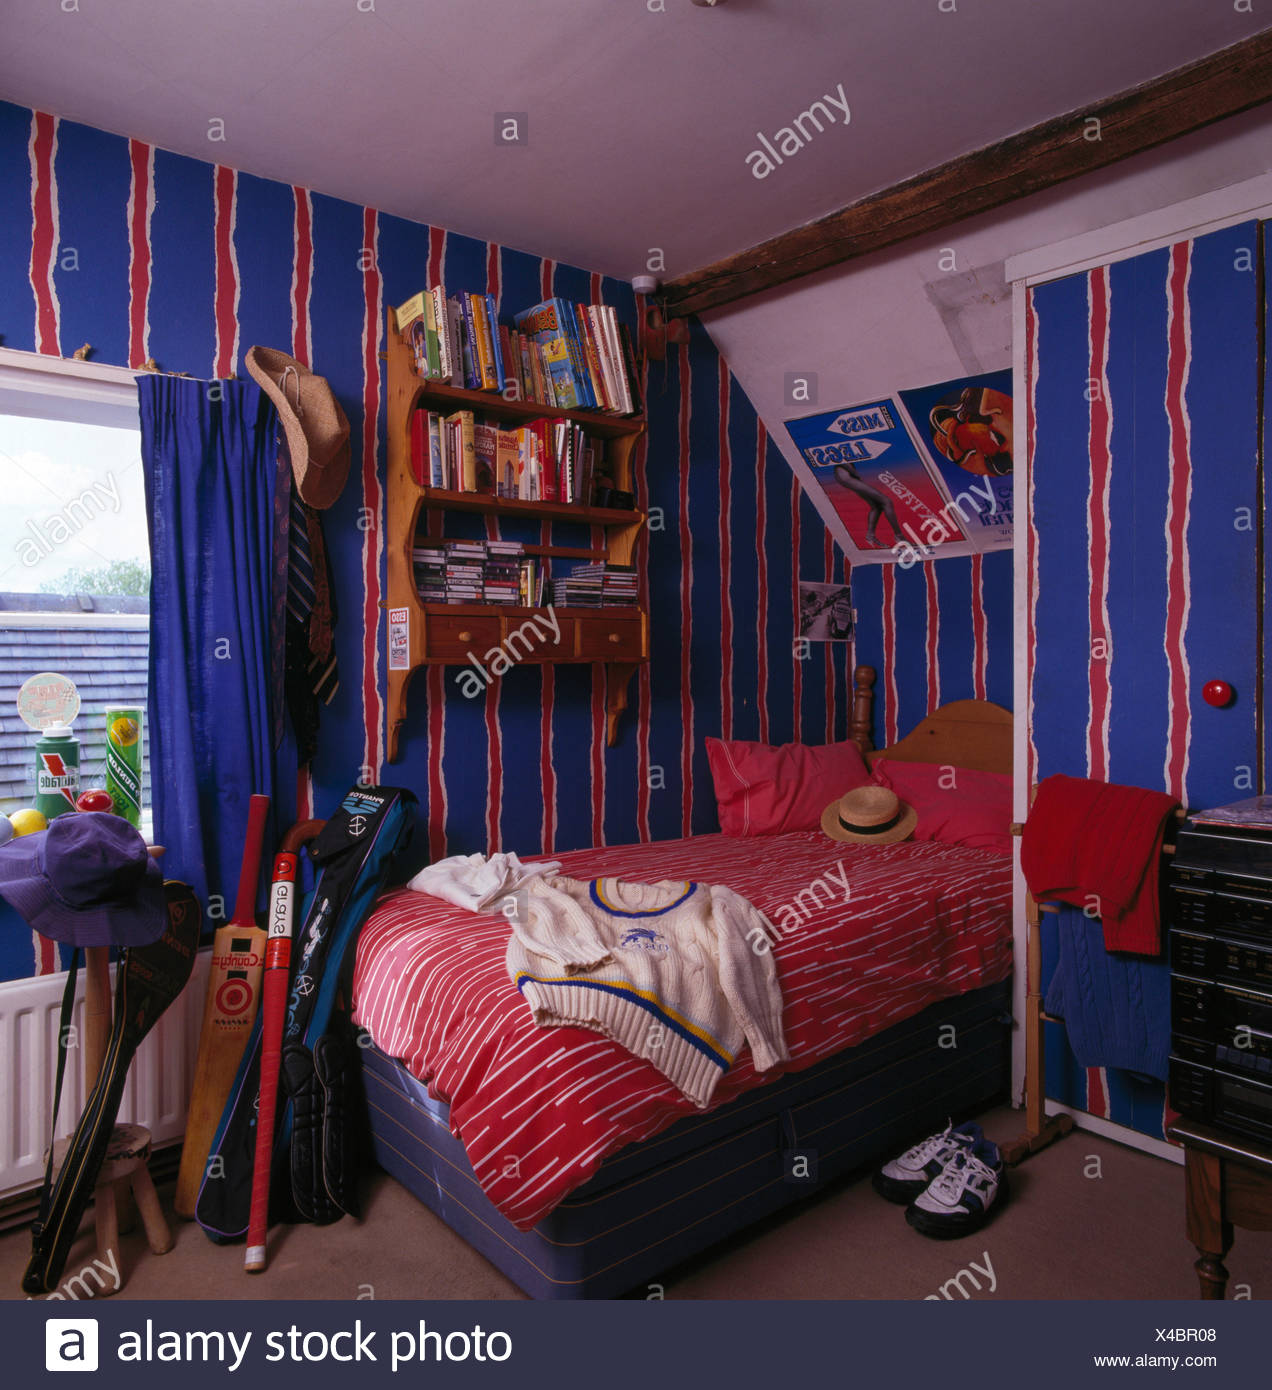 Red White And Blue Stripes Painted On Wall Of Boy S